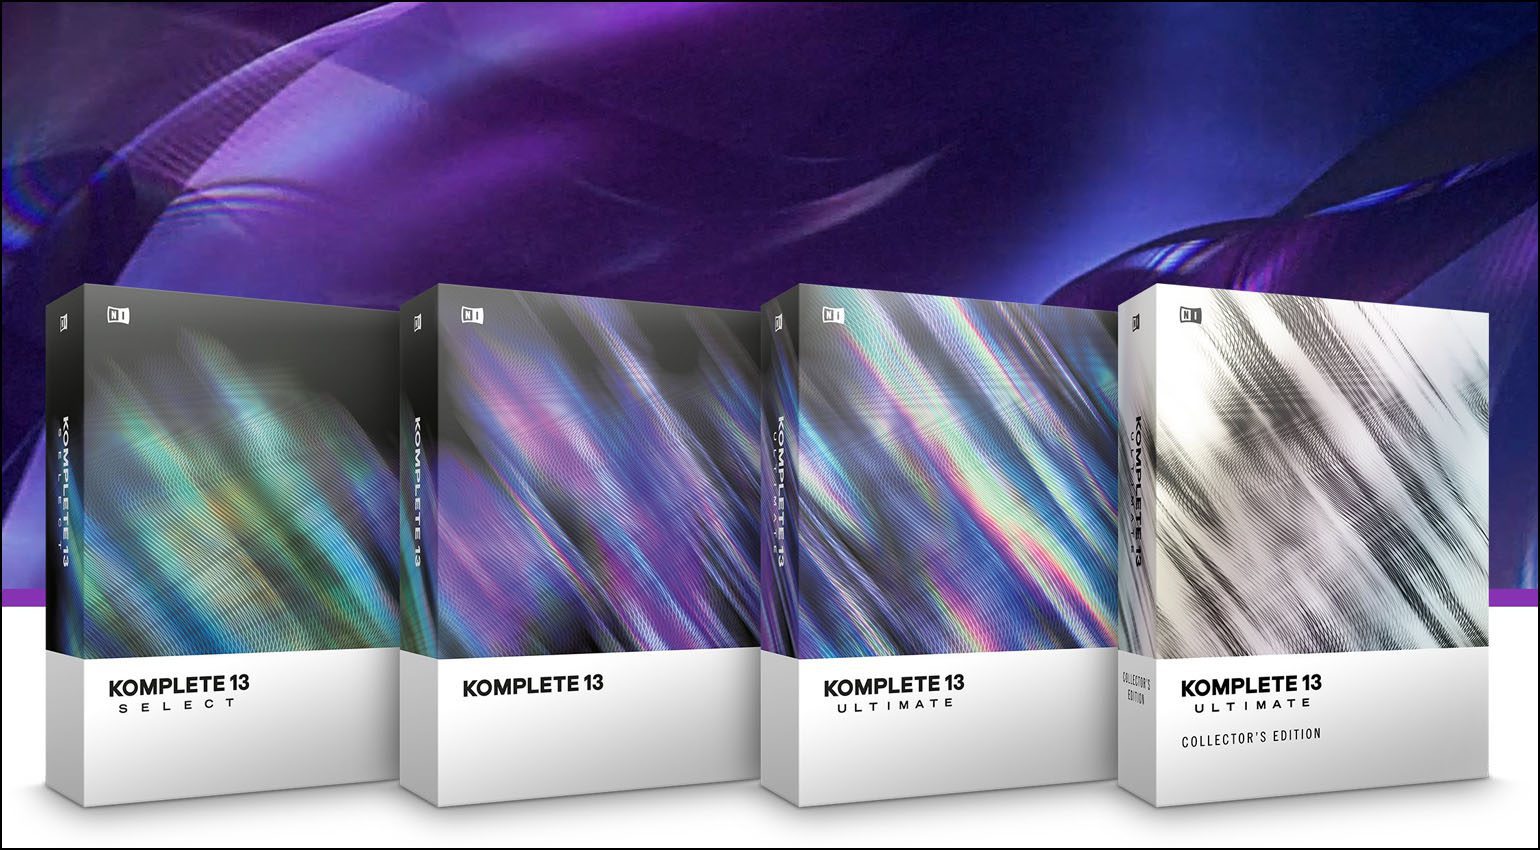 Native Instruments Komplete 13 on sale at near 40% off - gearnews.com